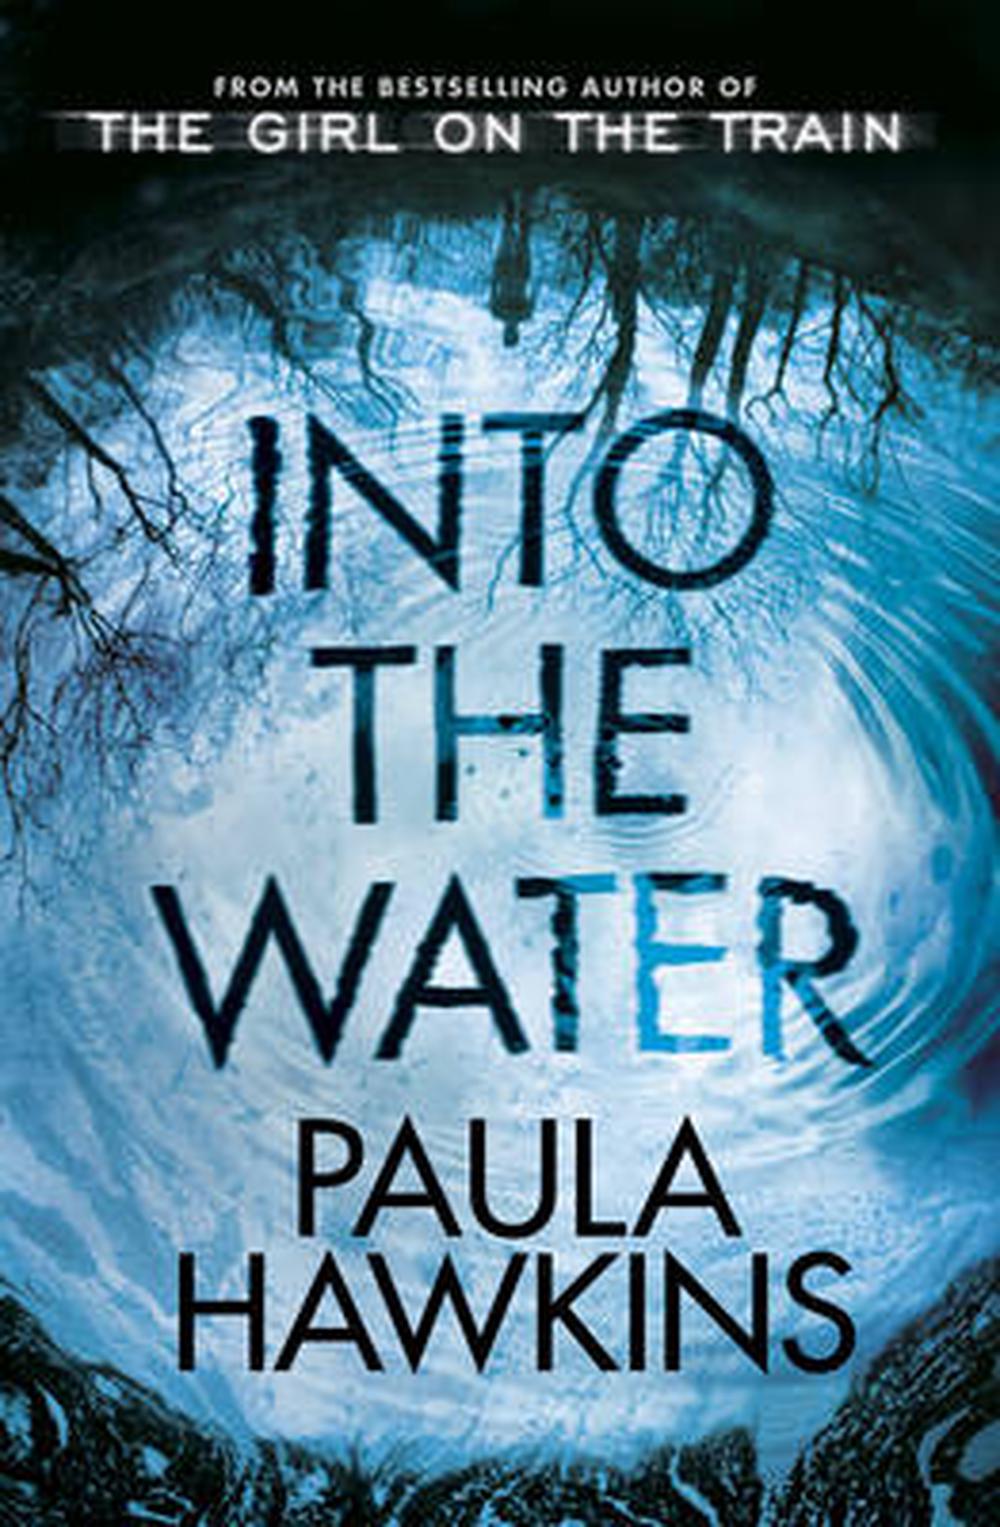 paula hawkins into the water review